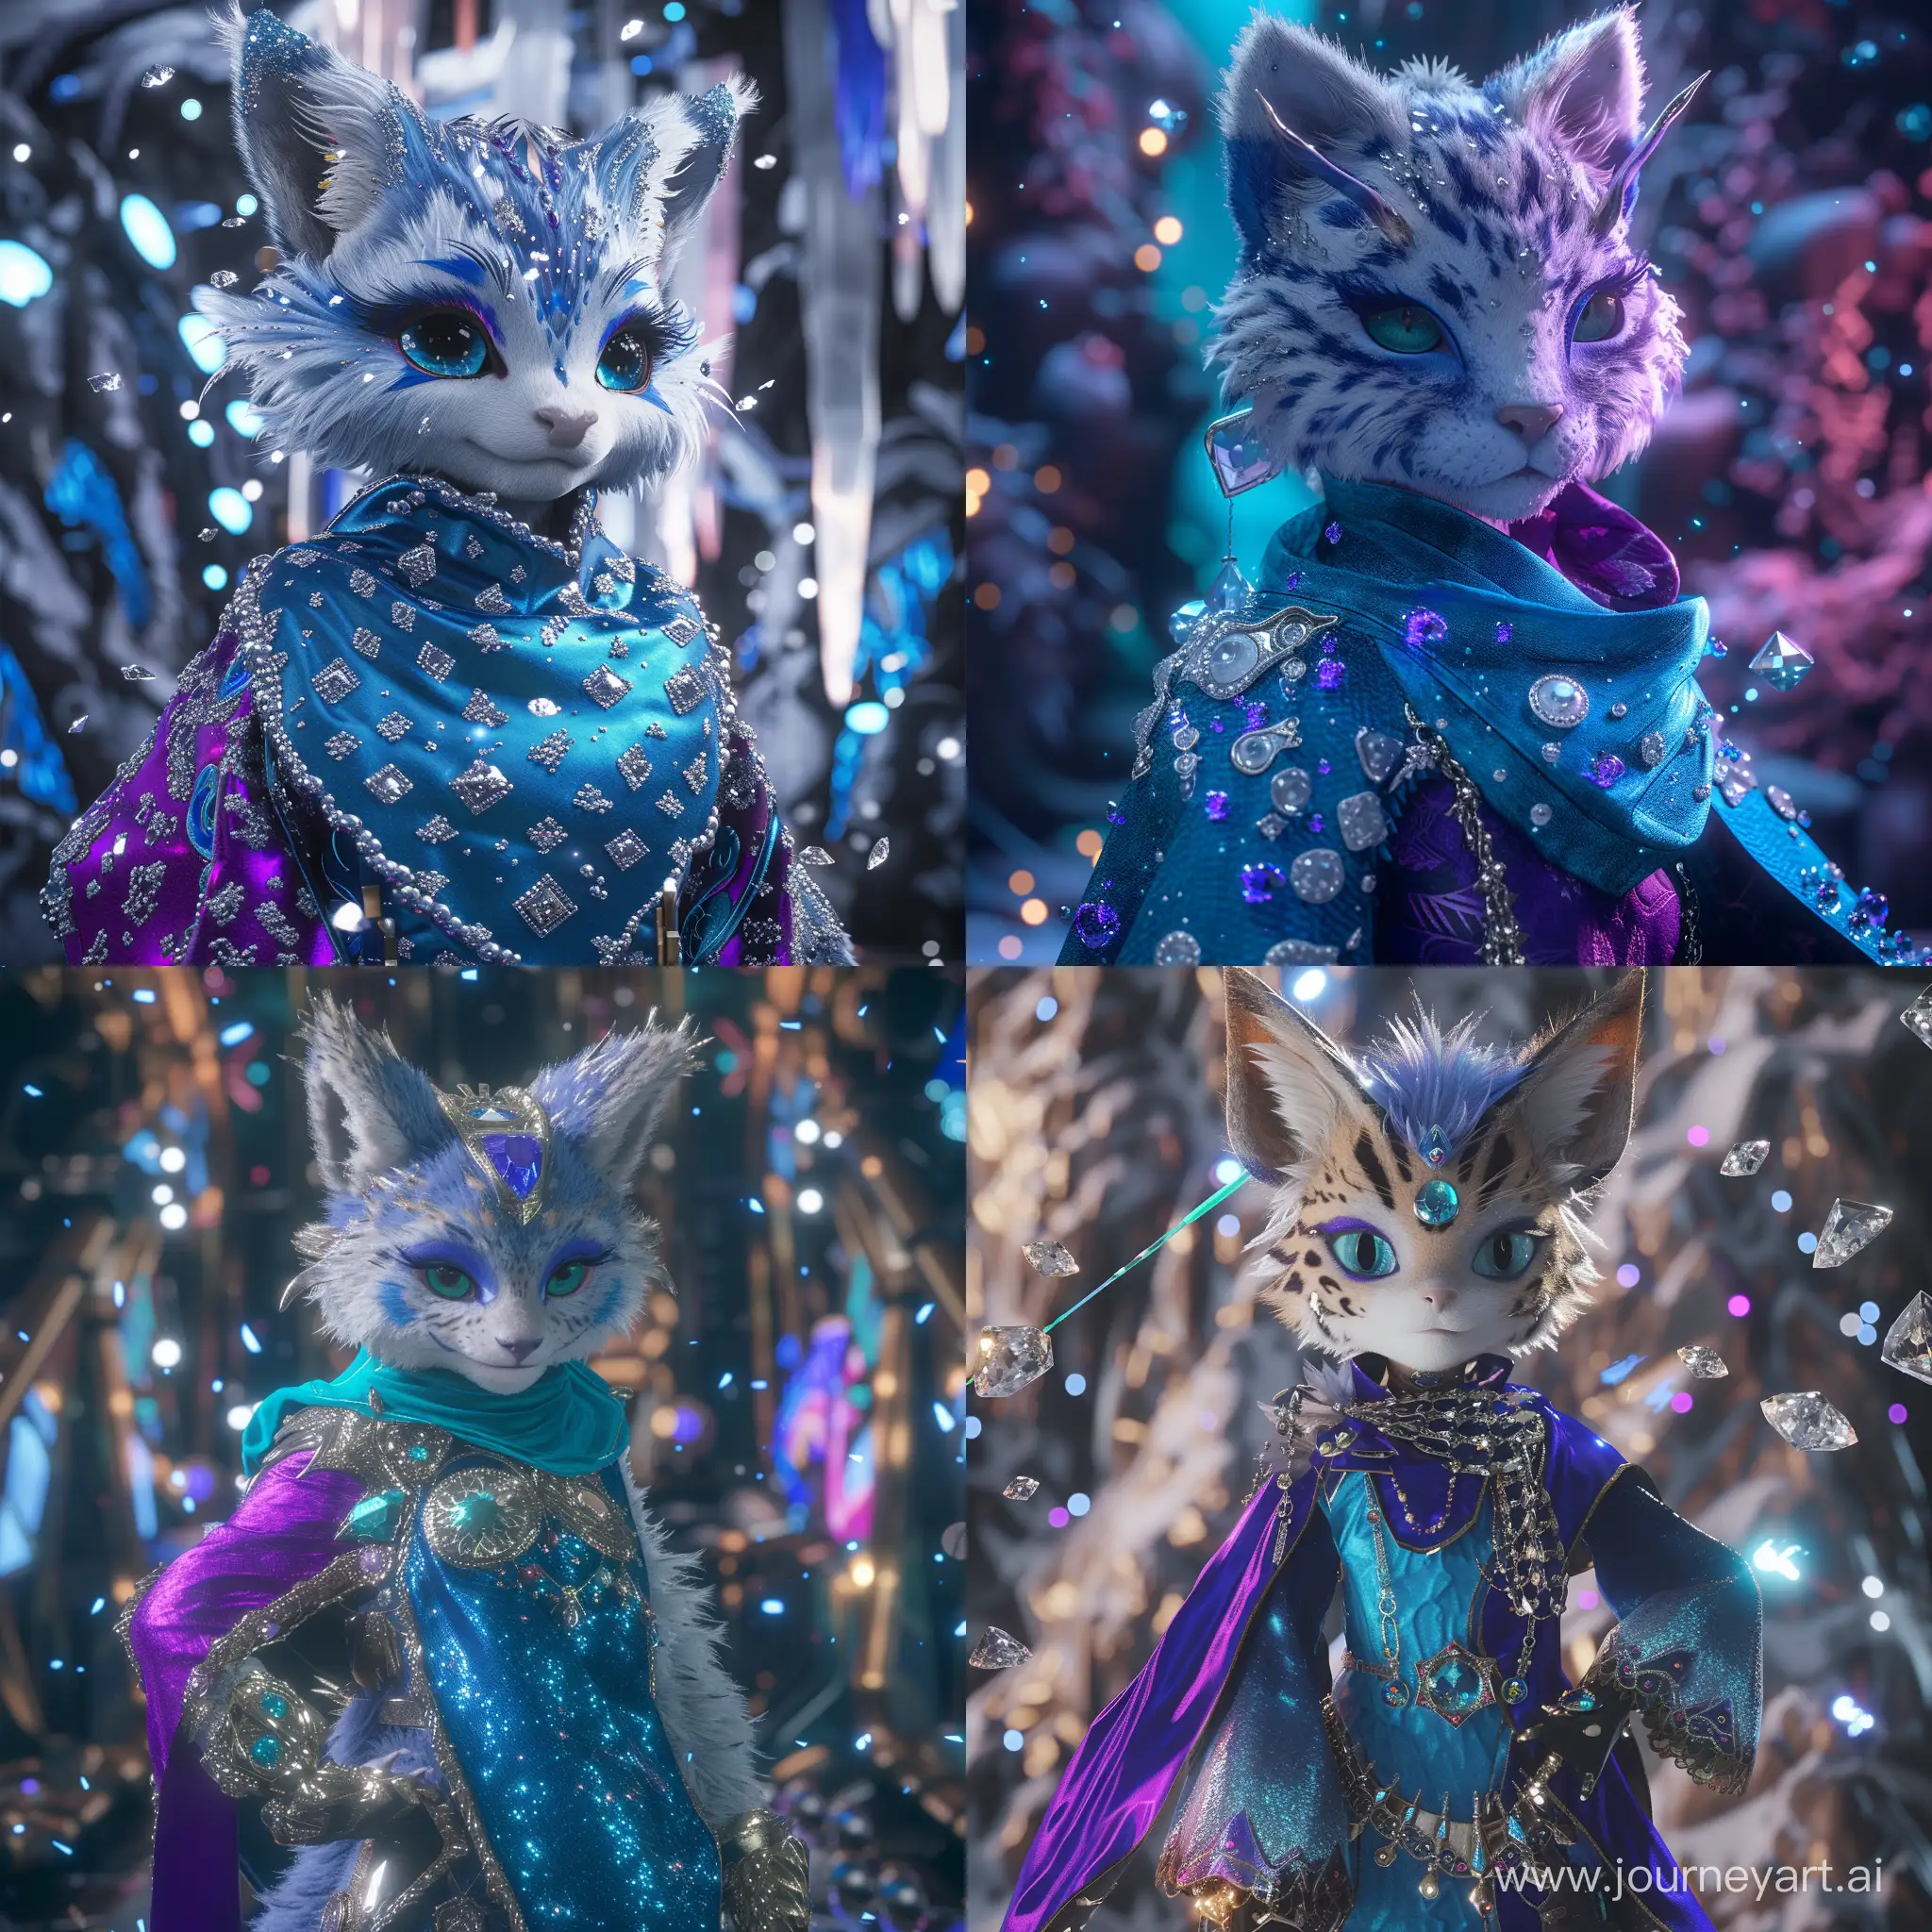 Place your futuristic furry kemono ocelot magical girl in a mesmerizing Unreal Engine 5 environment. Create a background that complements her blue and purple rarity cloth, incorporating magical elements and futuristic aesthetics. Ensure the lighting enhances the sparkle of diamonds and brings out the vibrancy of her fur. Use the engine's capabilities to make the scene come alive, providing a captivating backdrop that complements the character's beauty and uniqueness.